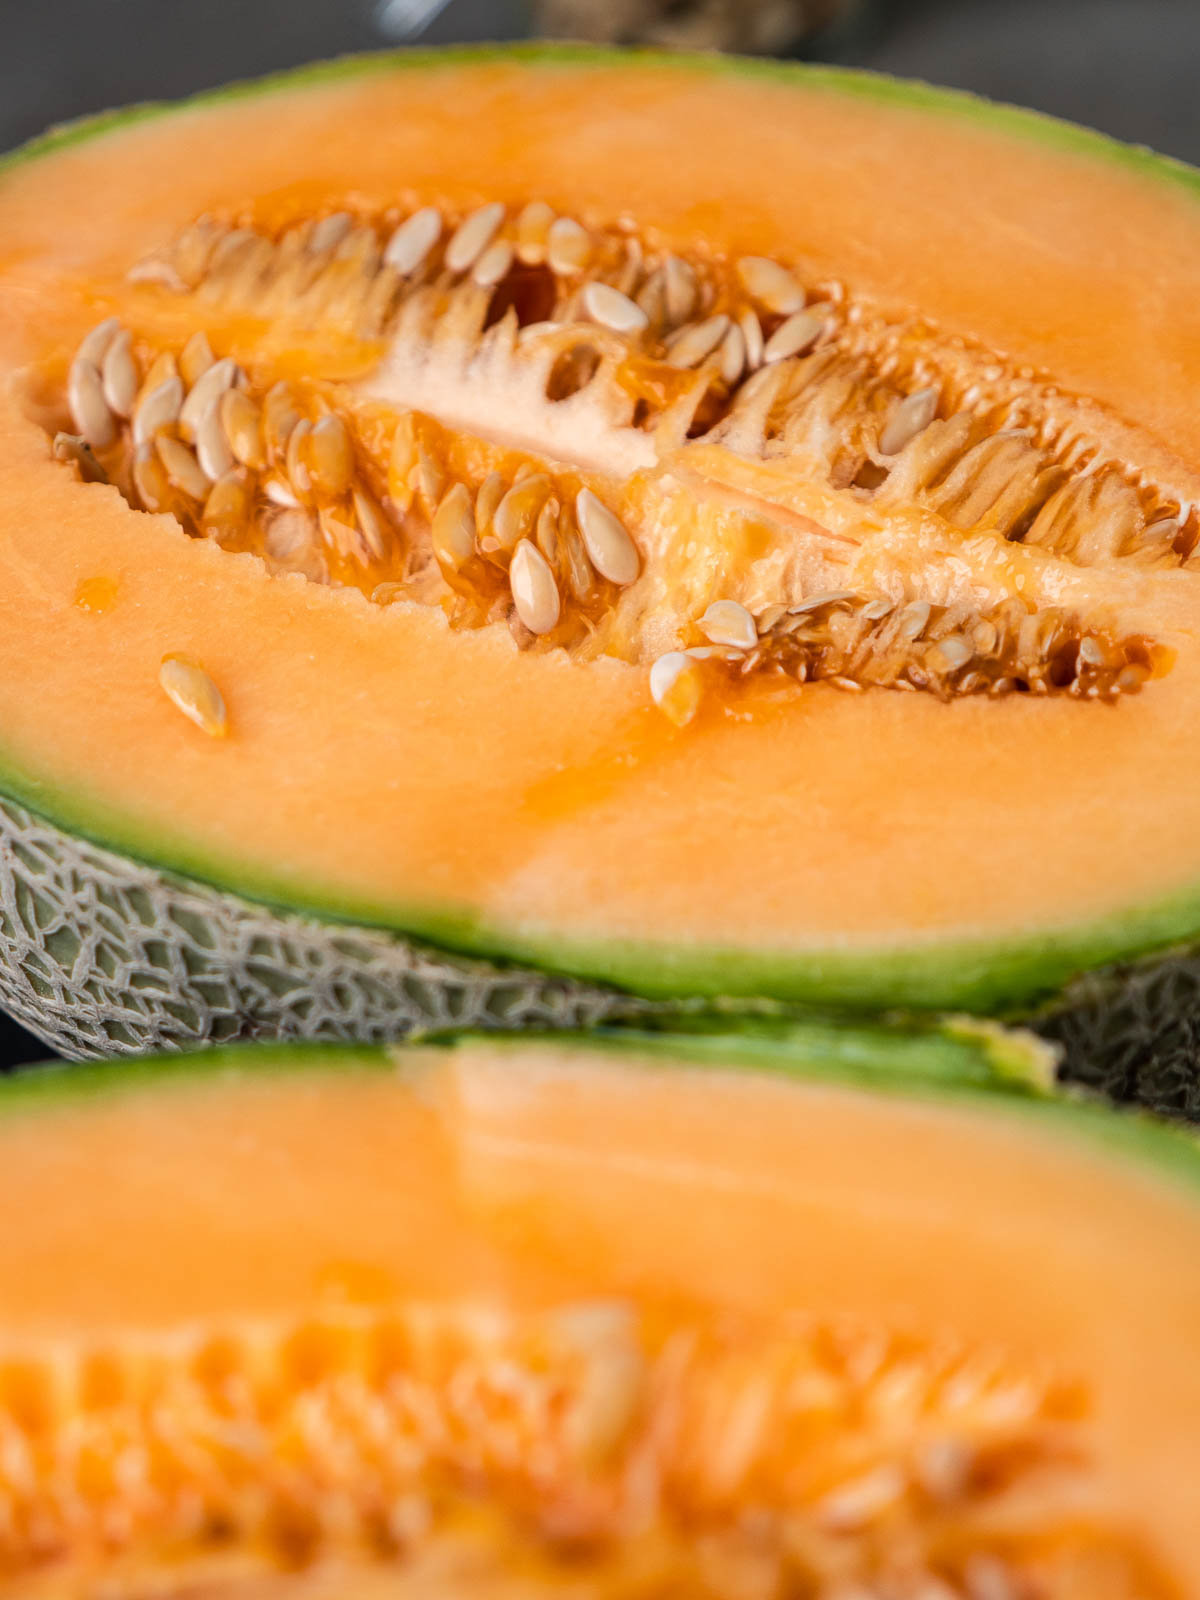 inside of a halved cantaloupe with the seeds still inside.